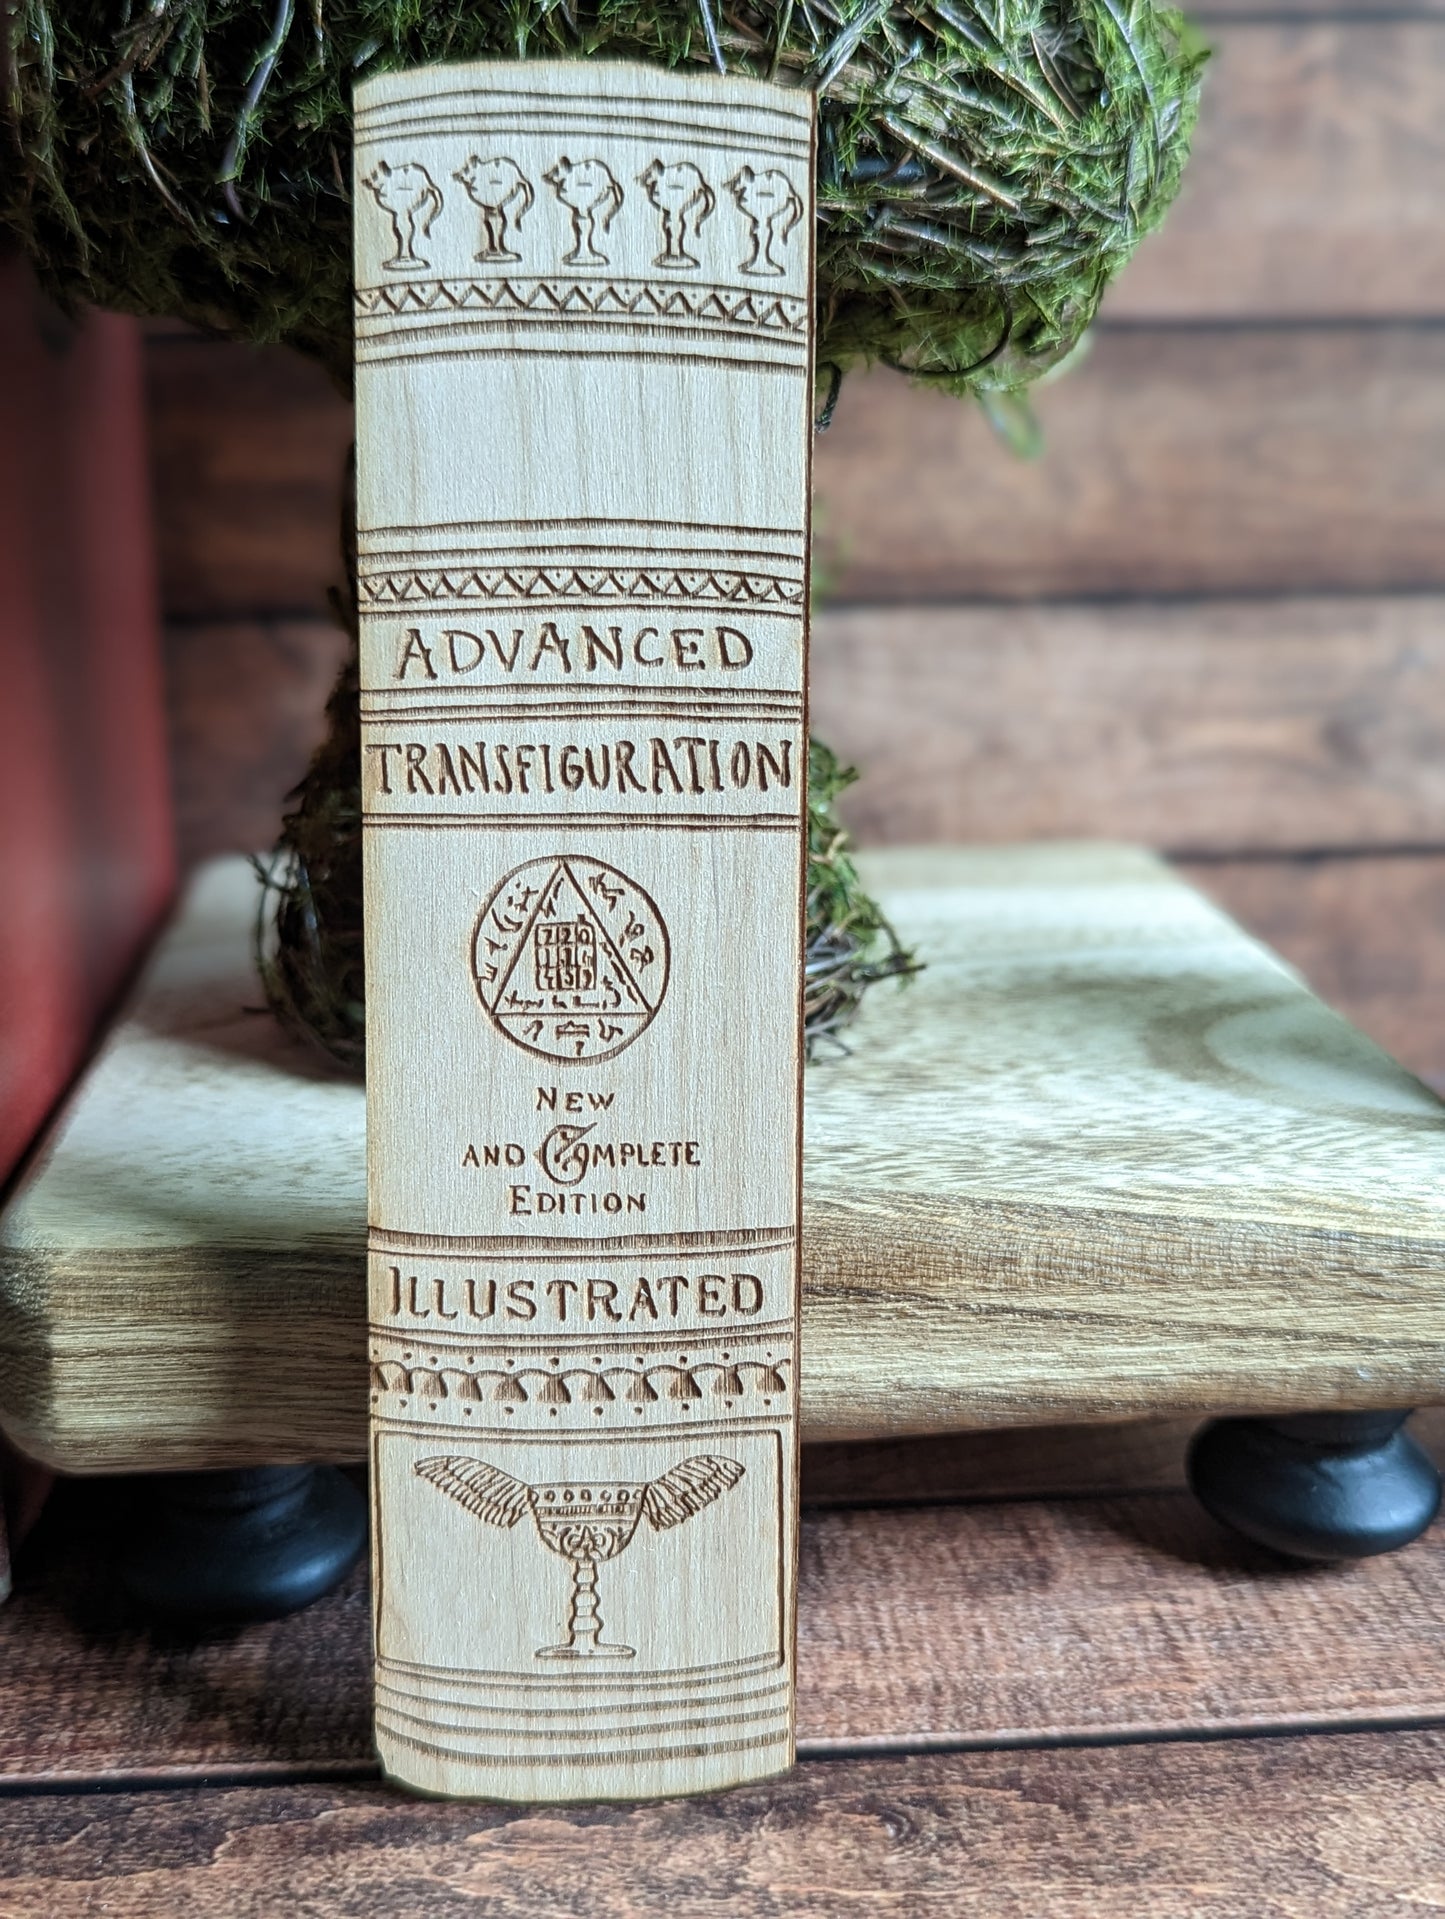 A wooden bookmark that says "Advanced Transfiguration. New and Complete Edition. Illustrated."